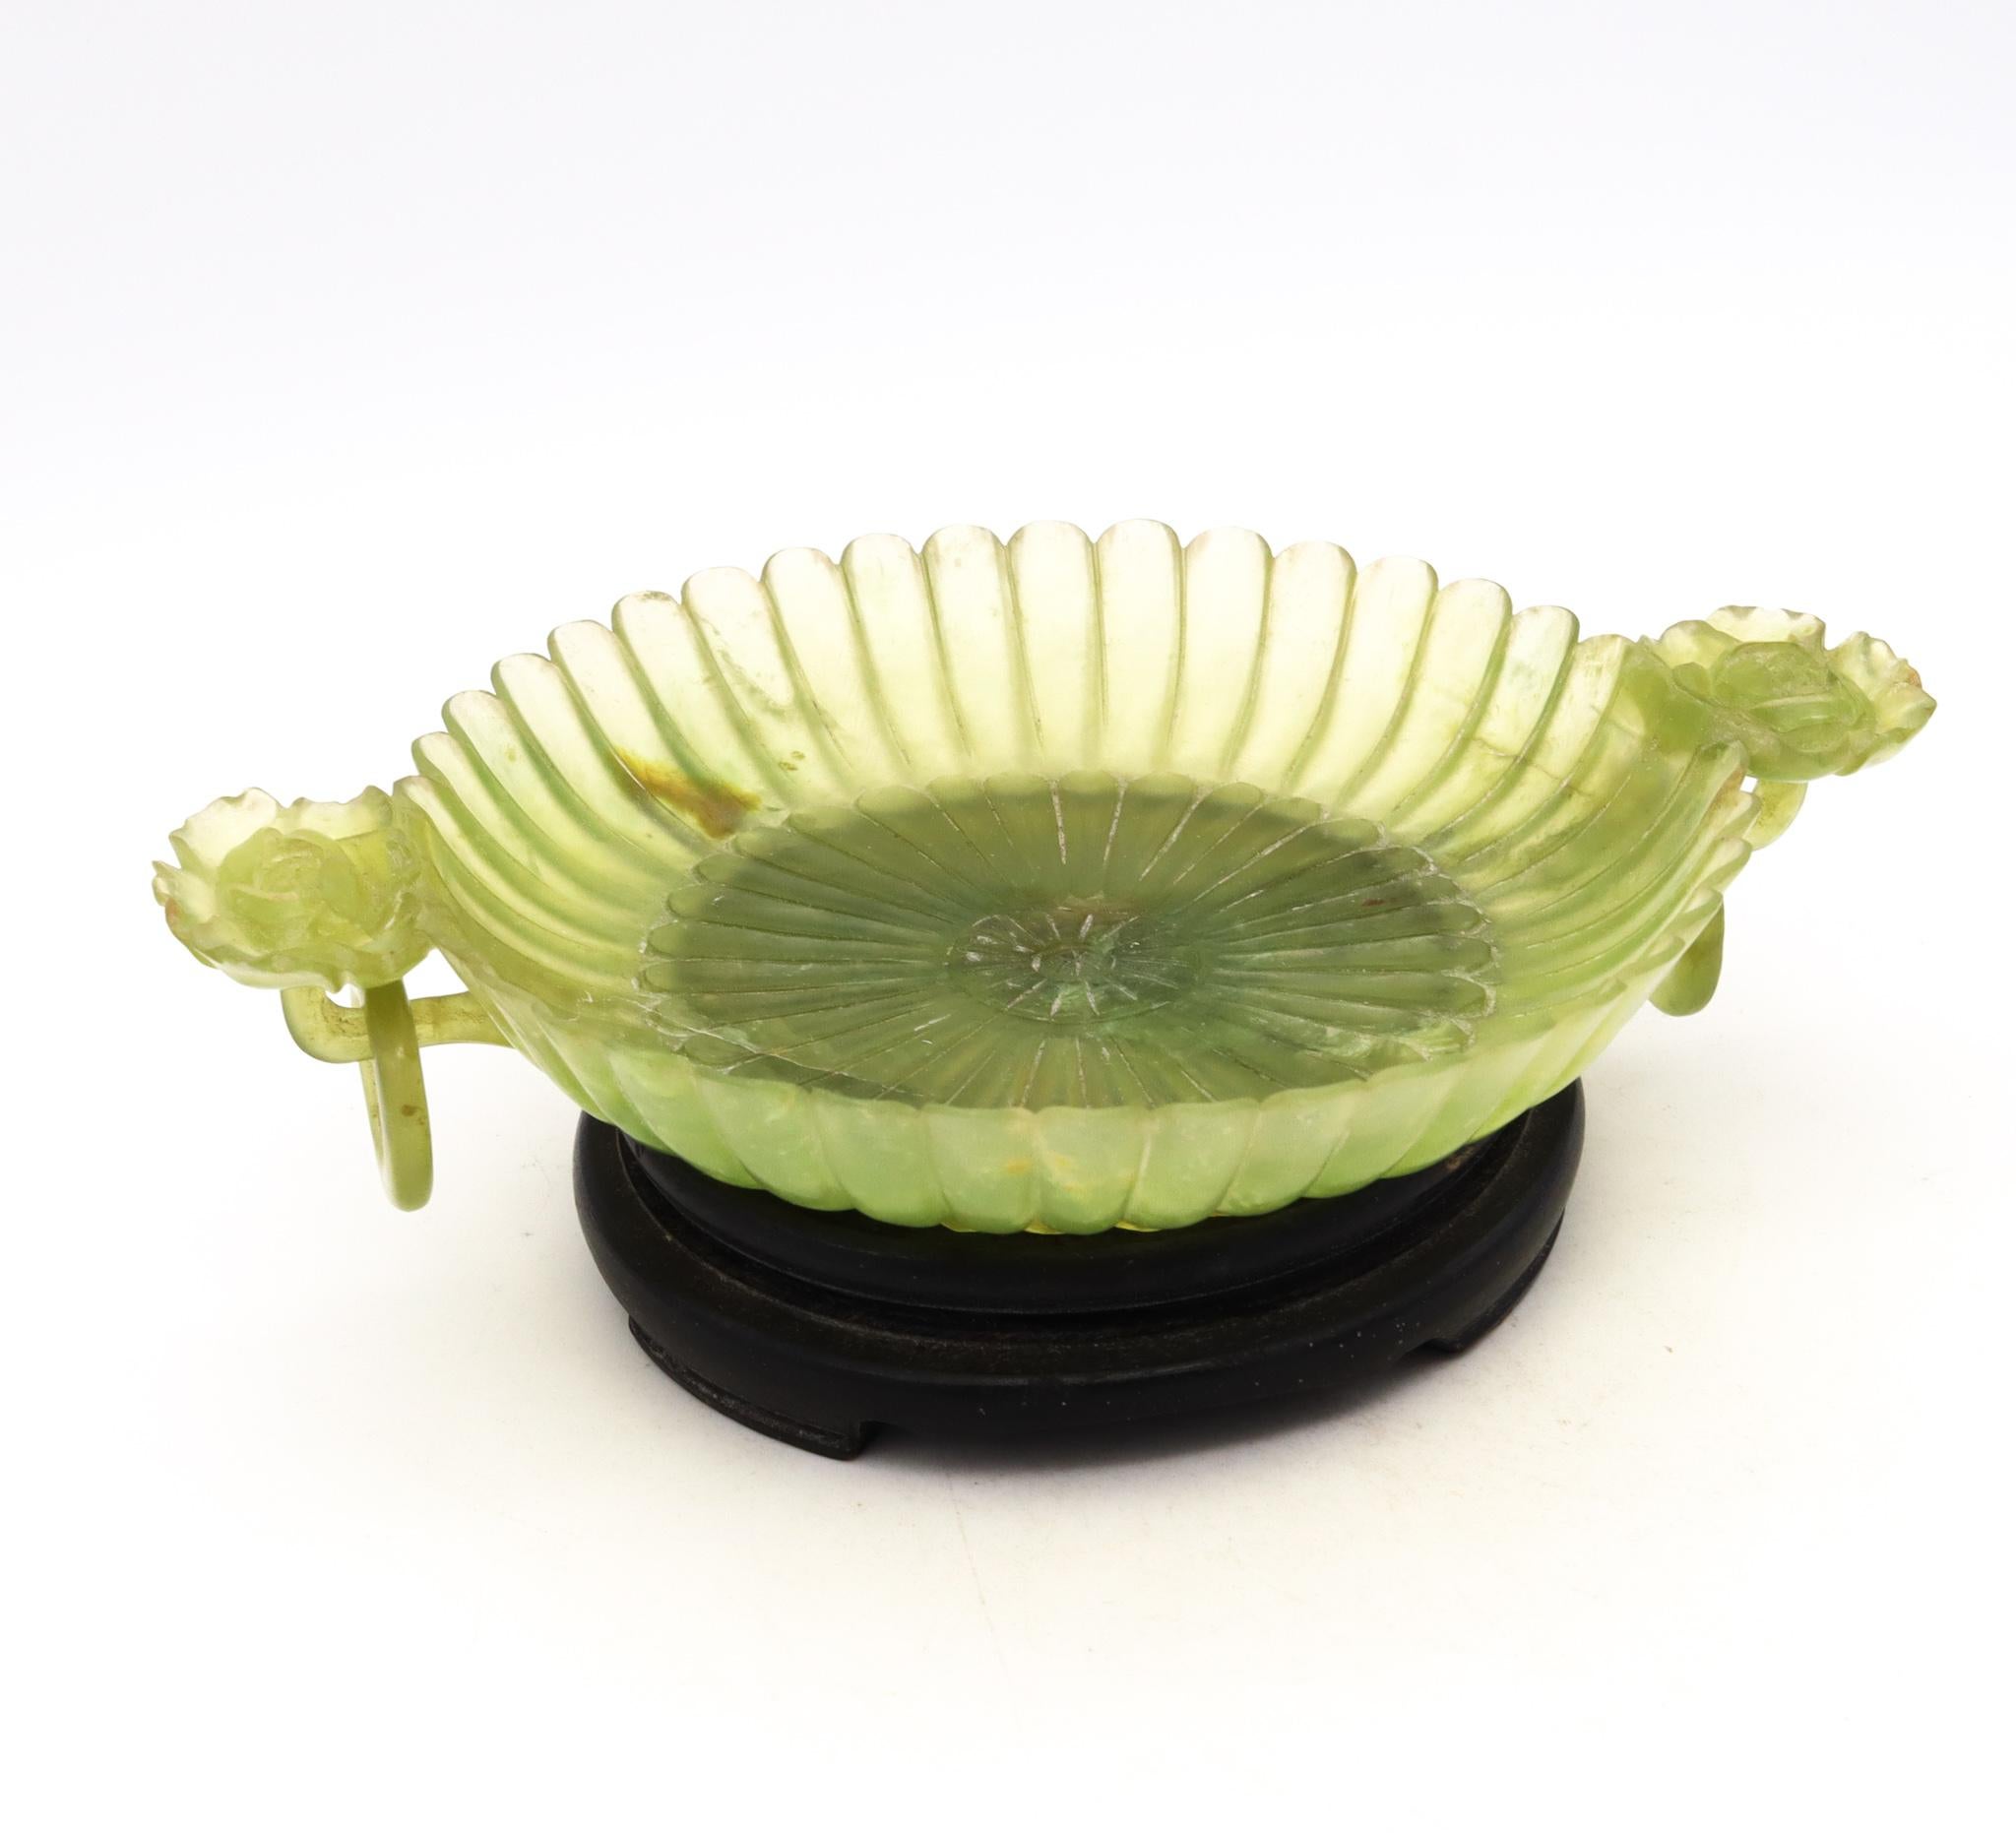 19th Century China 1900 Qing Dynasty Serpentine Dish in the Shape of a Chrysanthemum Flower